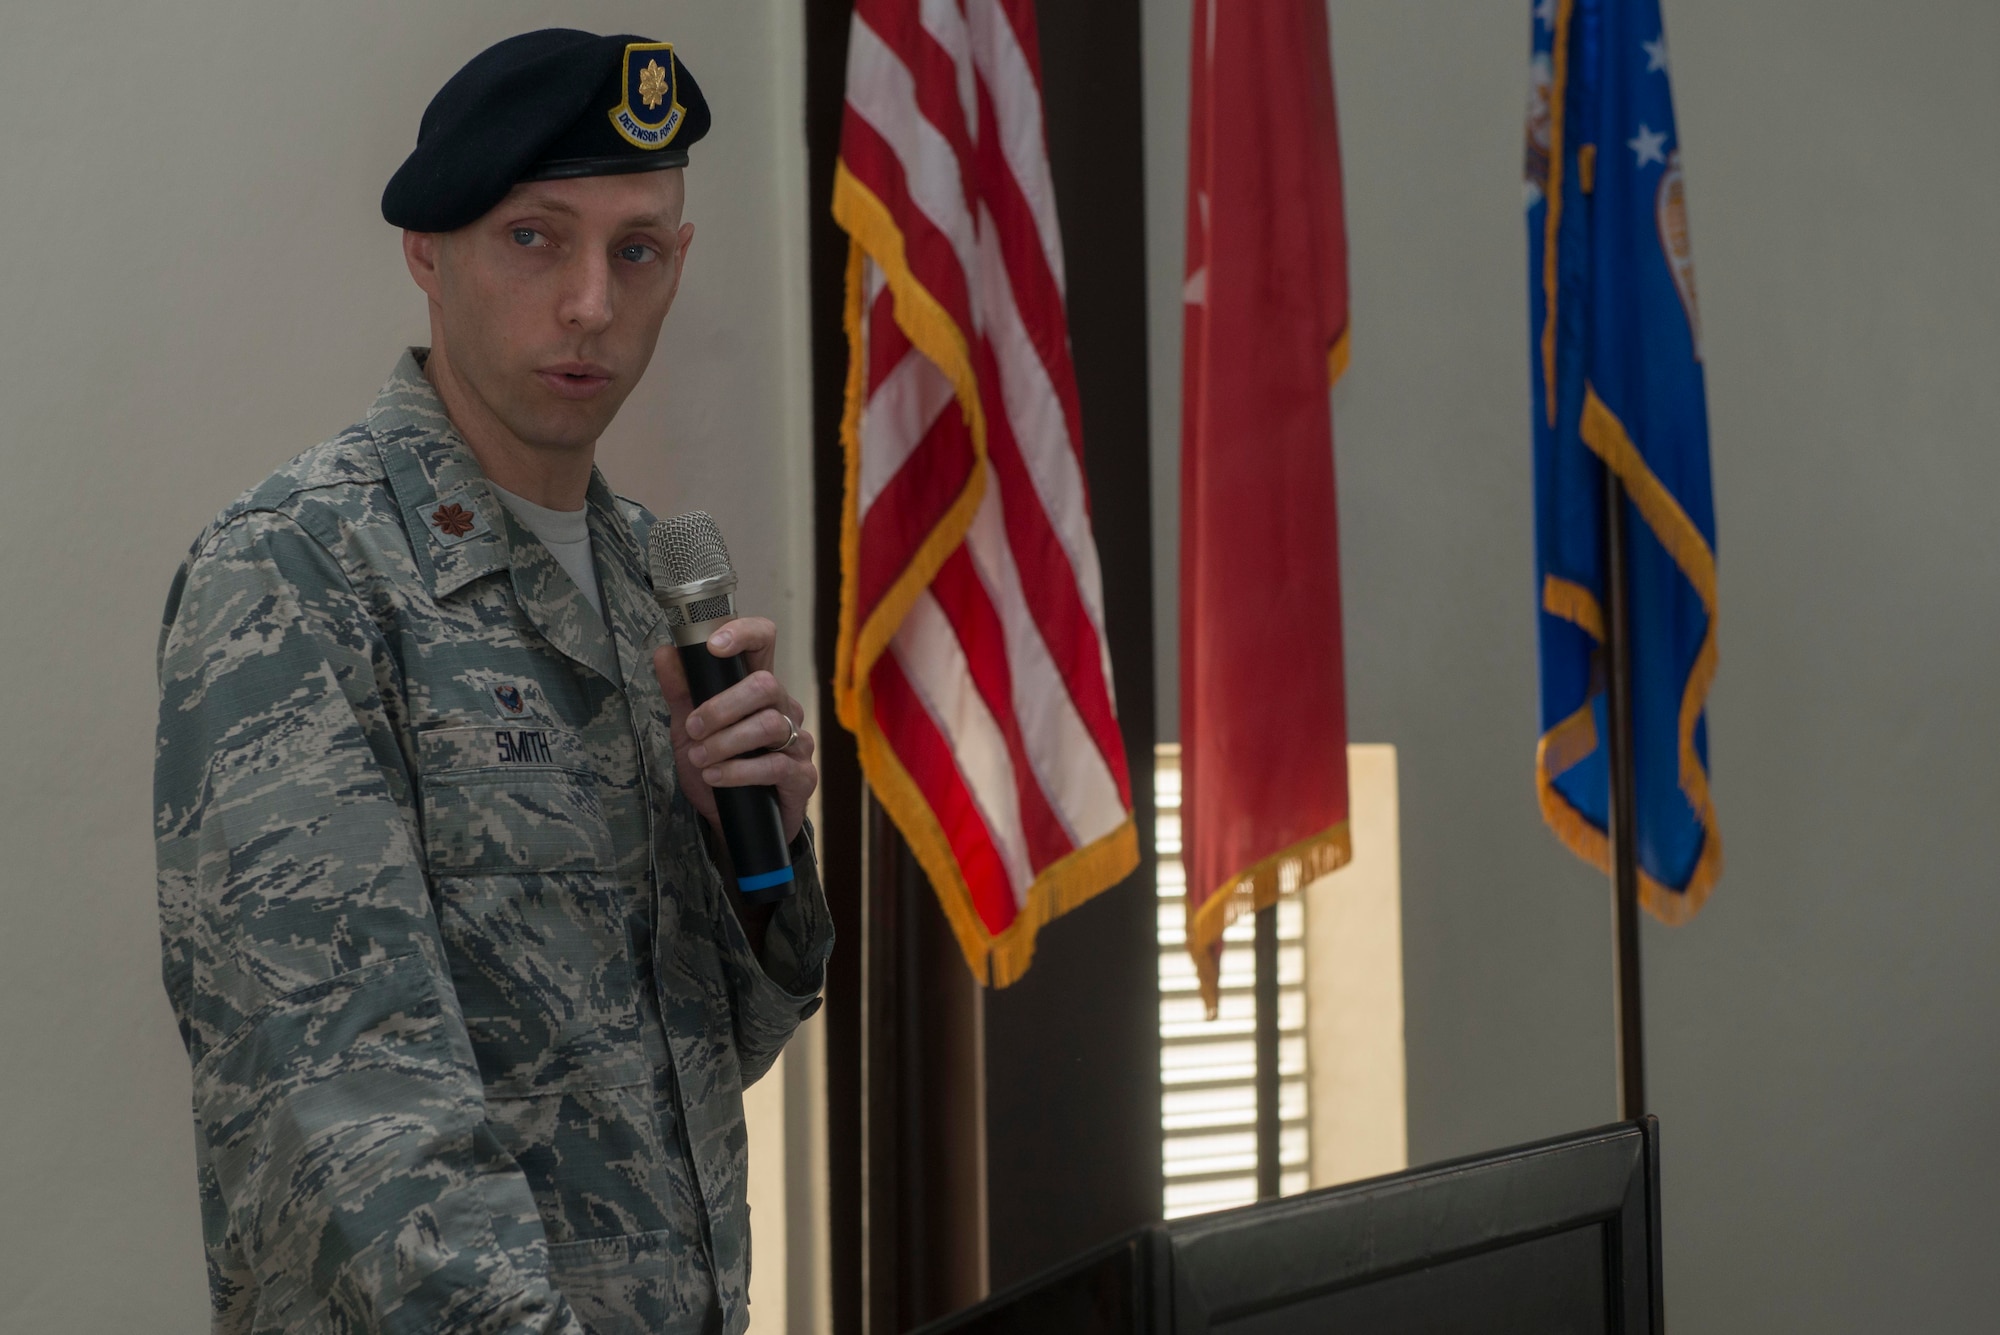 U.S. Air Force Maj. William Smith, 39th Security Forces Squadron commander, speaks during a change of command ceremony June 24, 2016, at Incirlik Air Base, Turkey. A change of command ceremony is a tradition that represents a formal transfer of authority and responsibility from the outgoing commander to the incoming commander. (U.S. Air Force photo by Senior Airman John Nieves Camacho/Released)